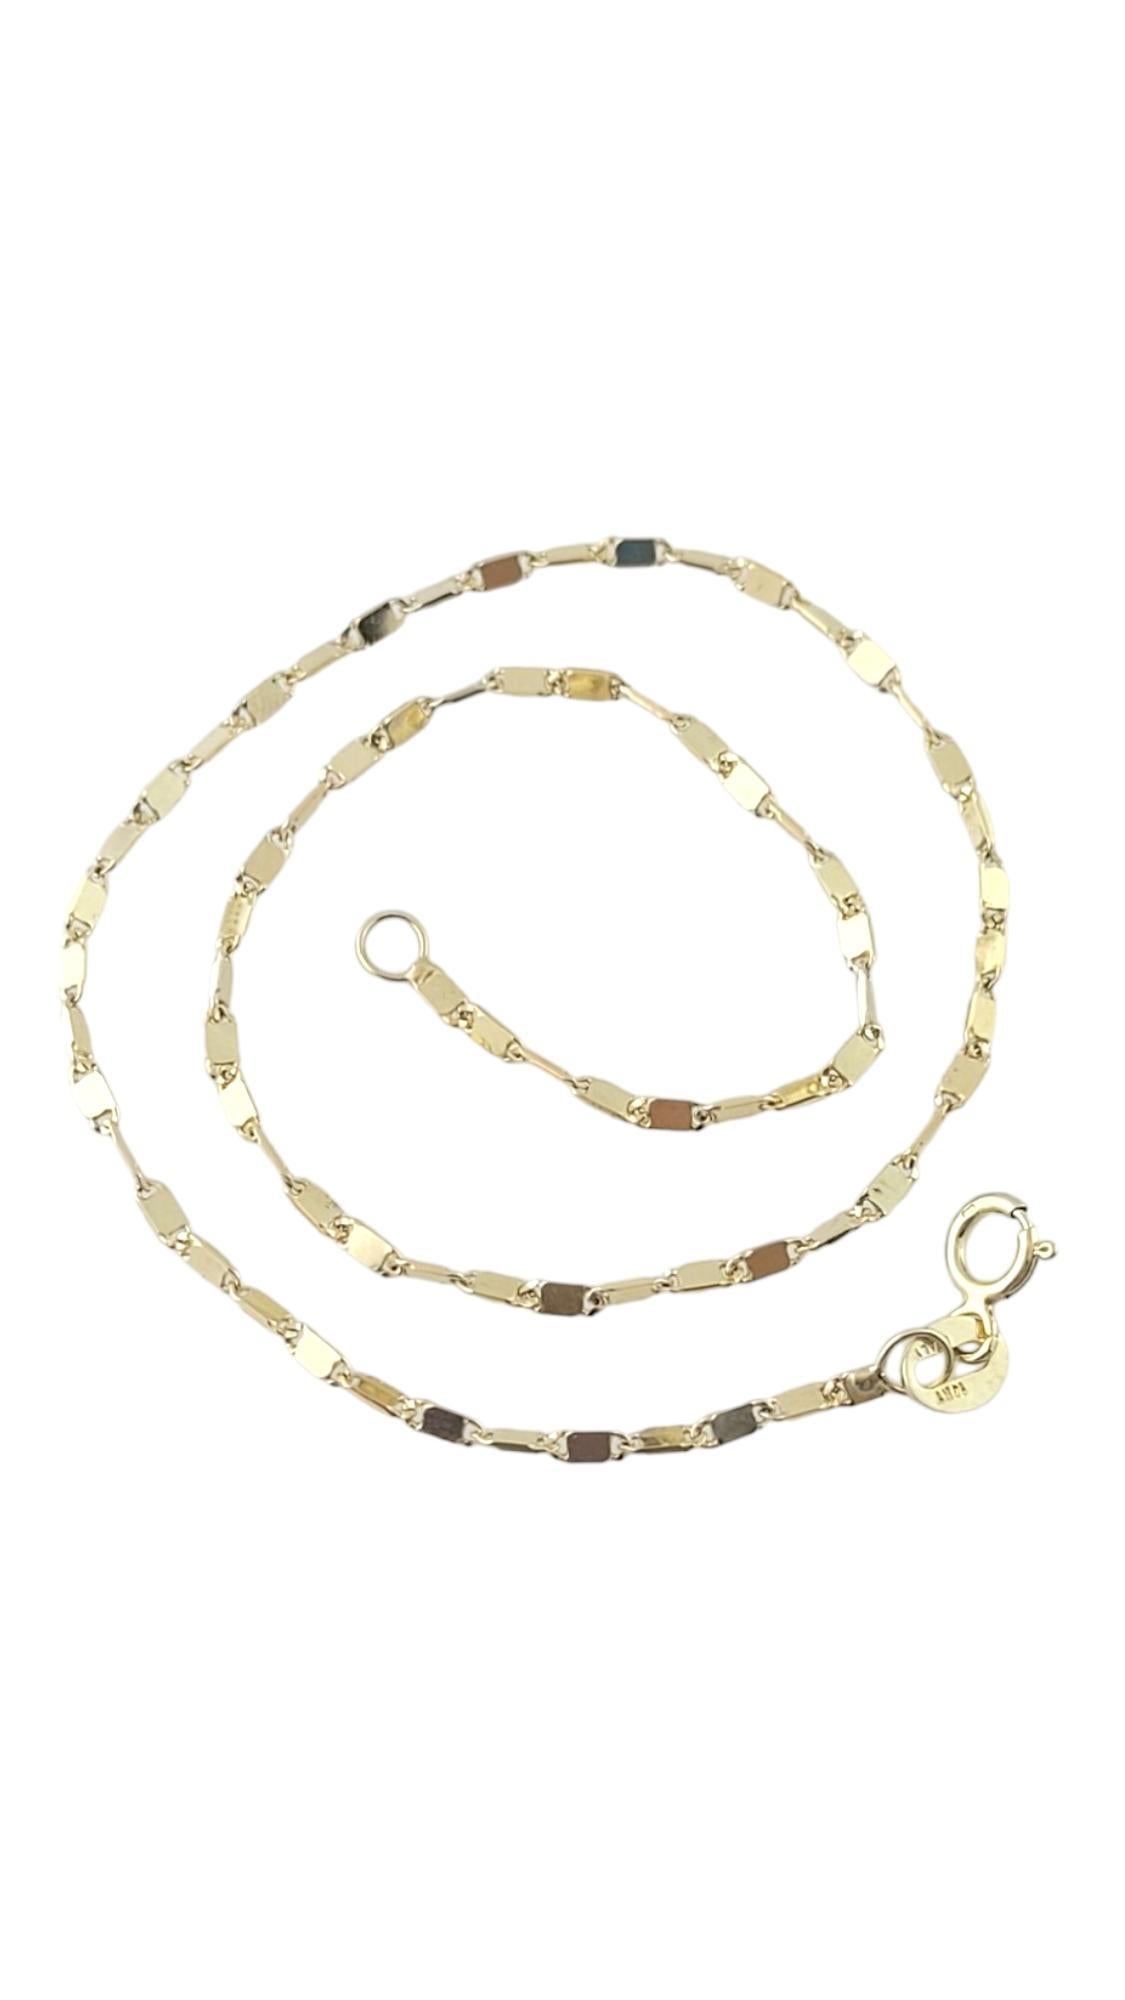 Vintage 14K Yellow Gold Anklet

This gorgeous yet simple anklet is meticulously crafted from 14K yellow gold and would look amazing on anyone!

Chain length: 10